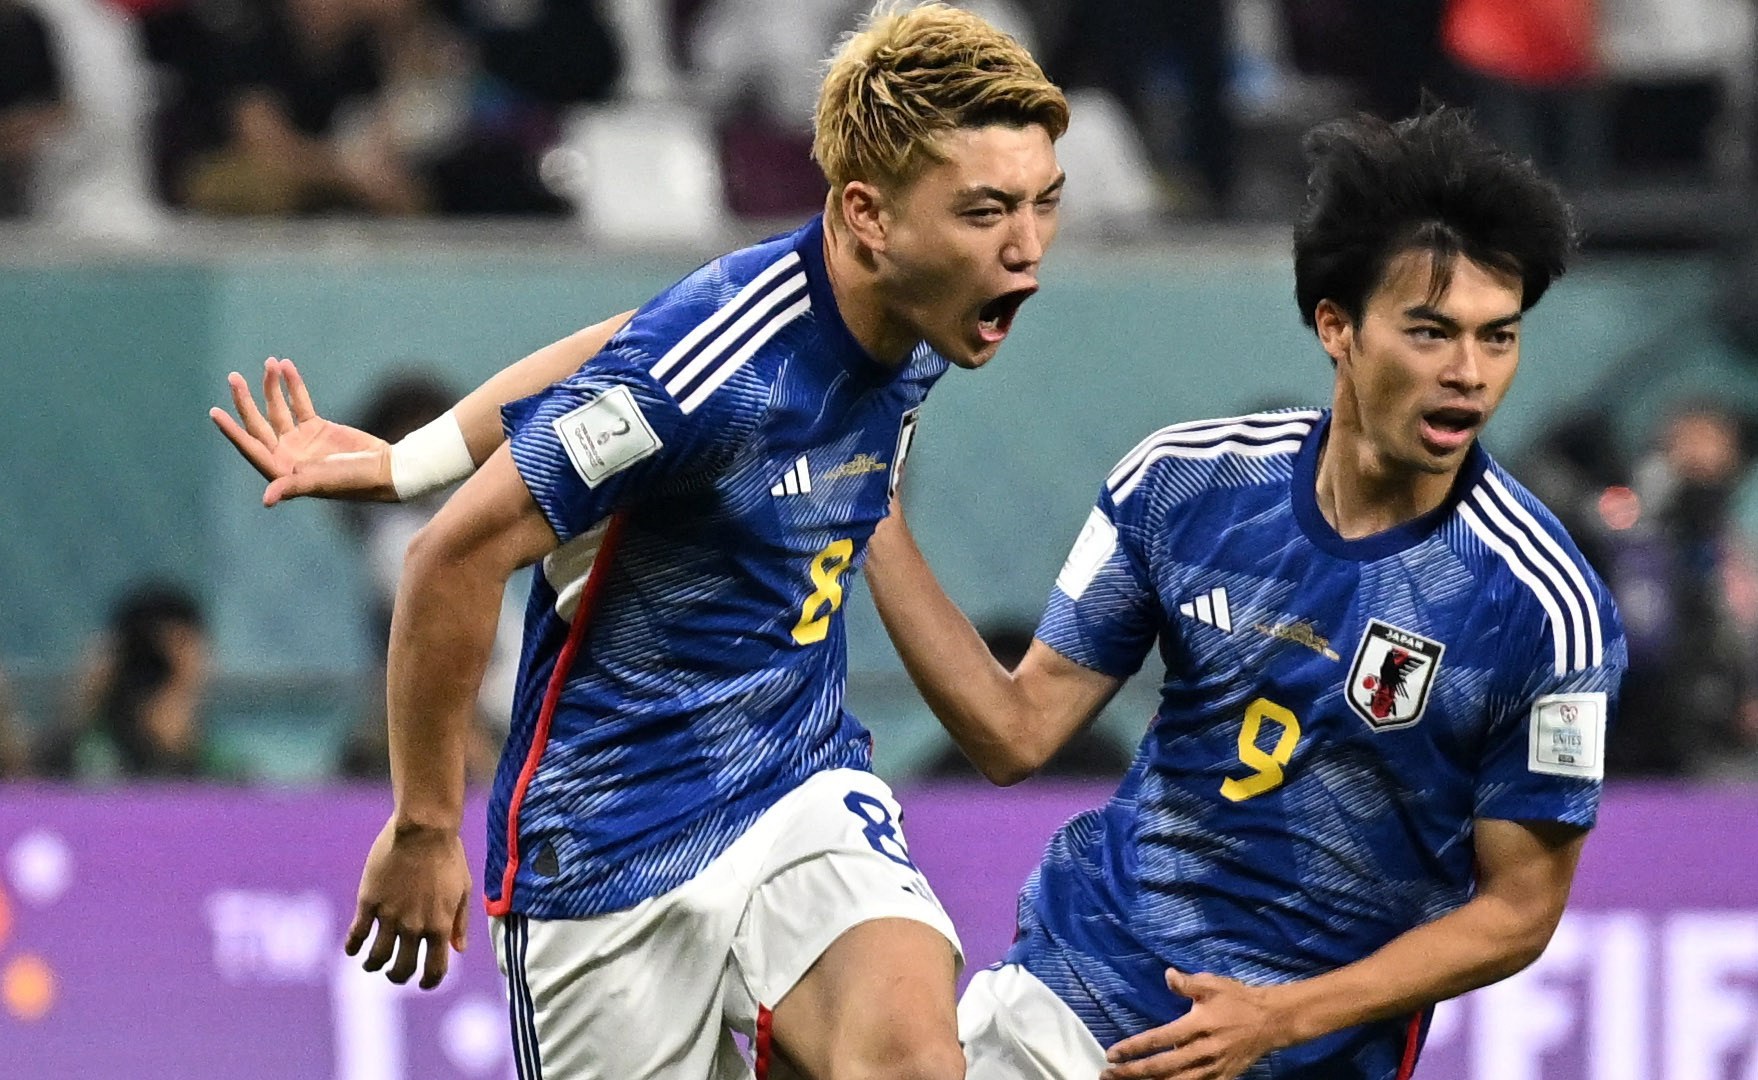 Japan stun Spain 2-1 to book place in World Cup last 16